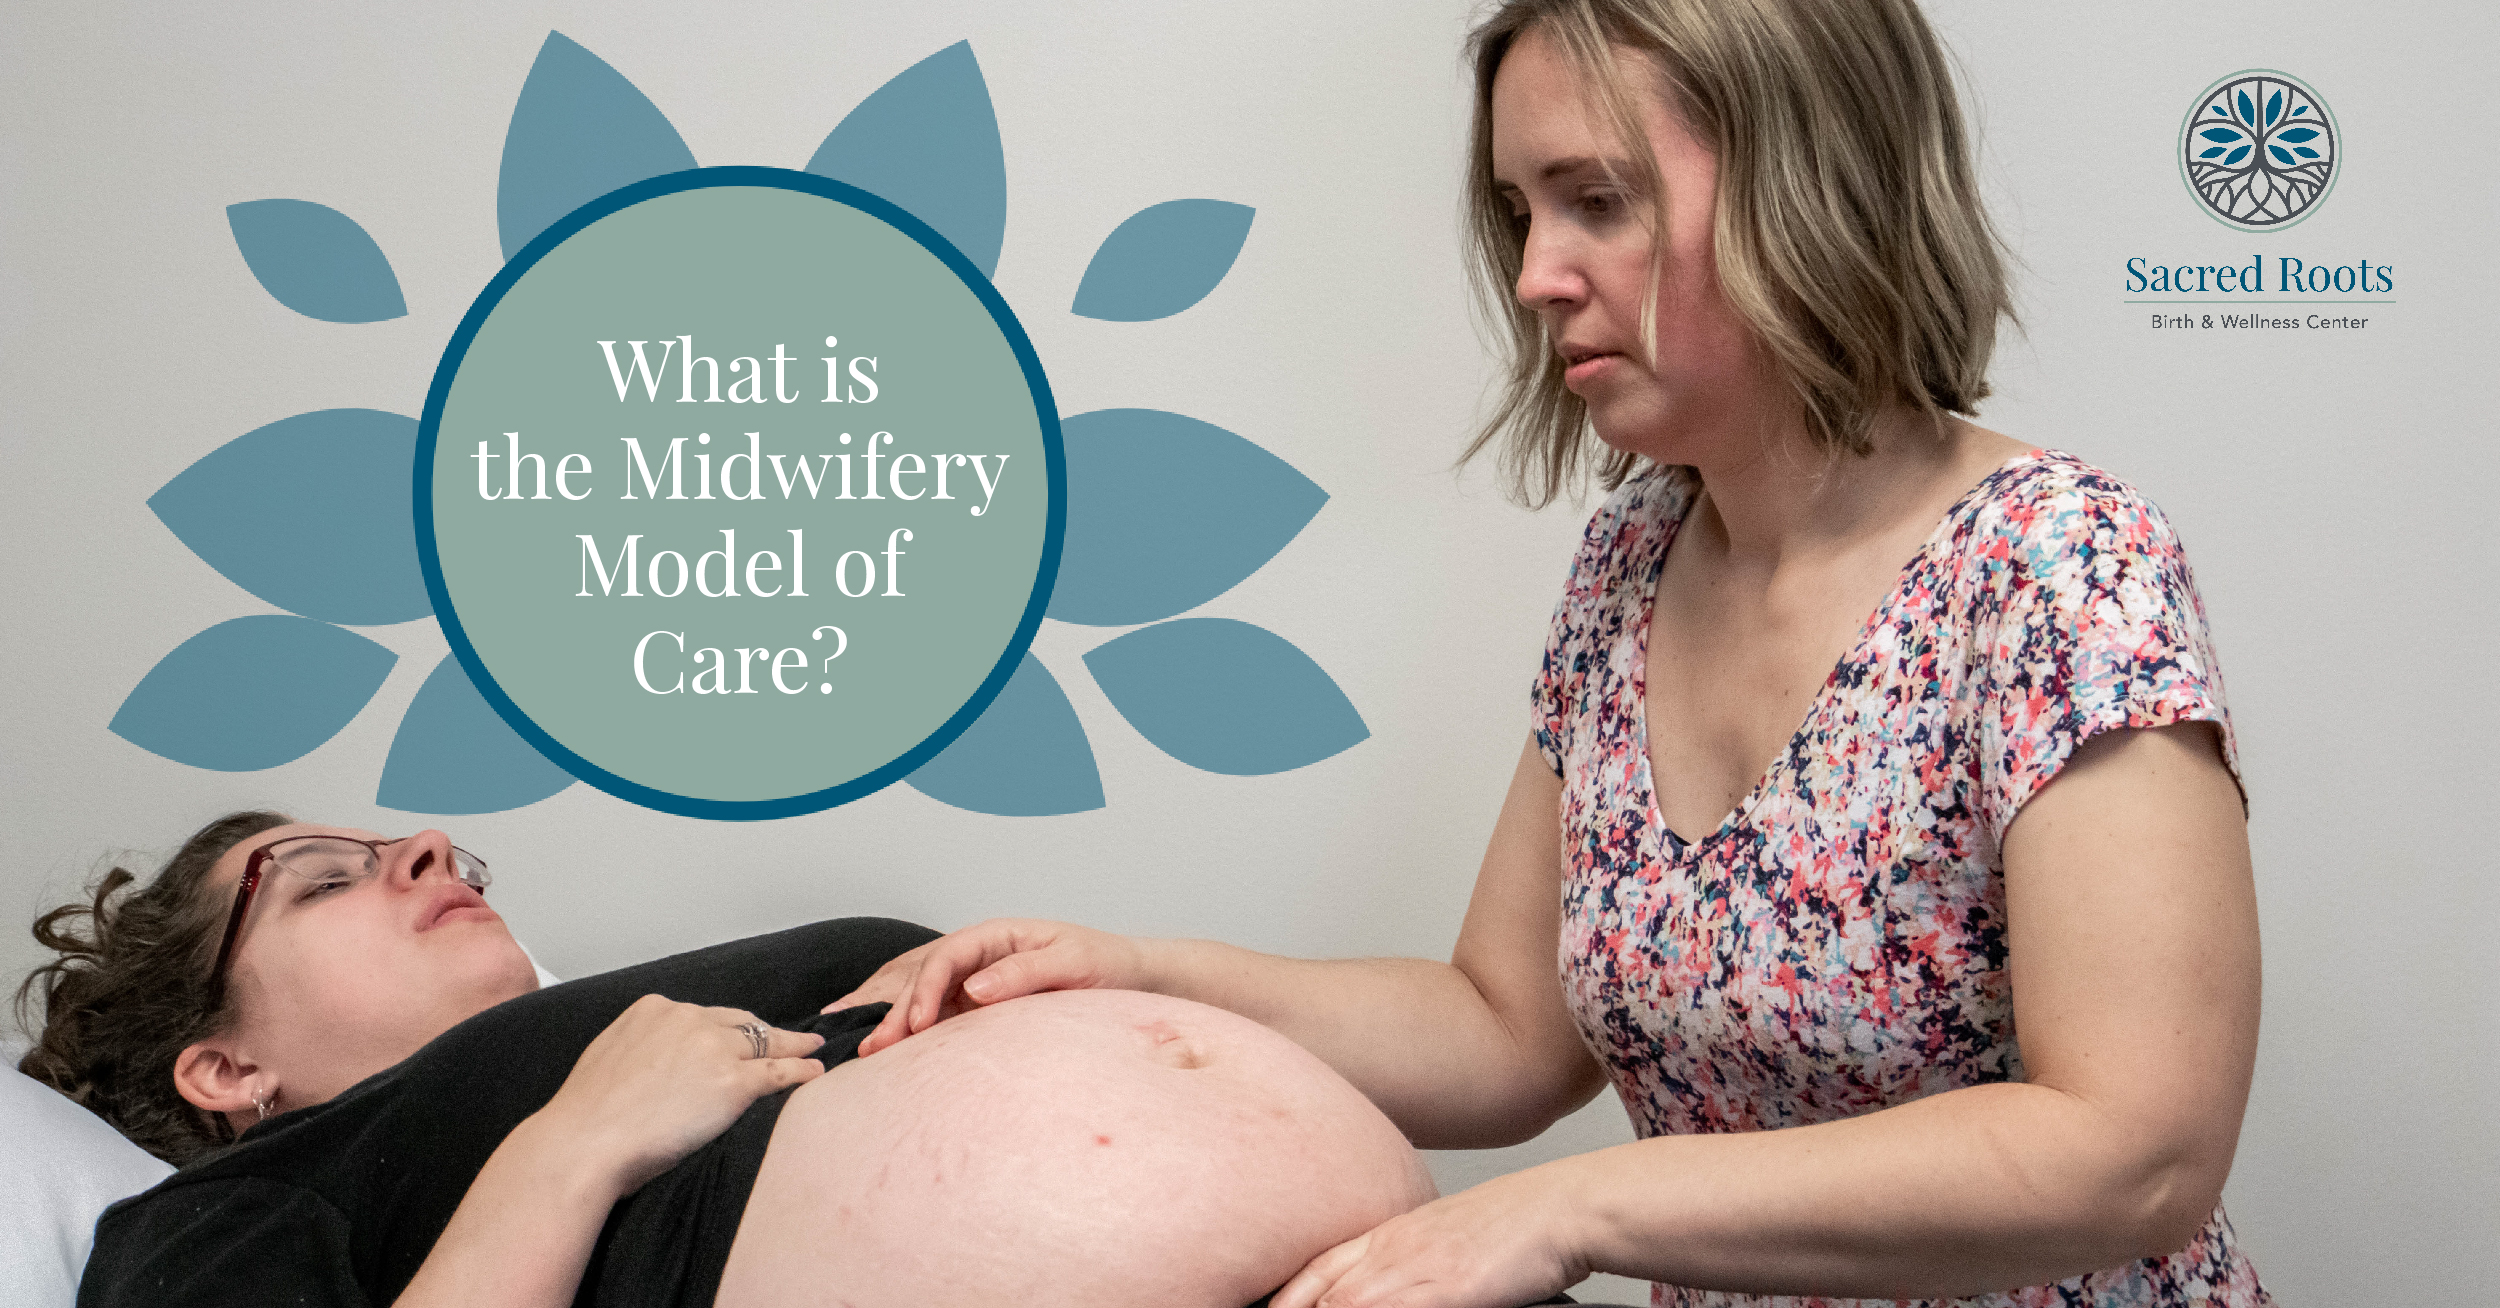 What is the Midwifery Model of Care?